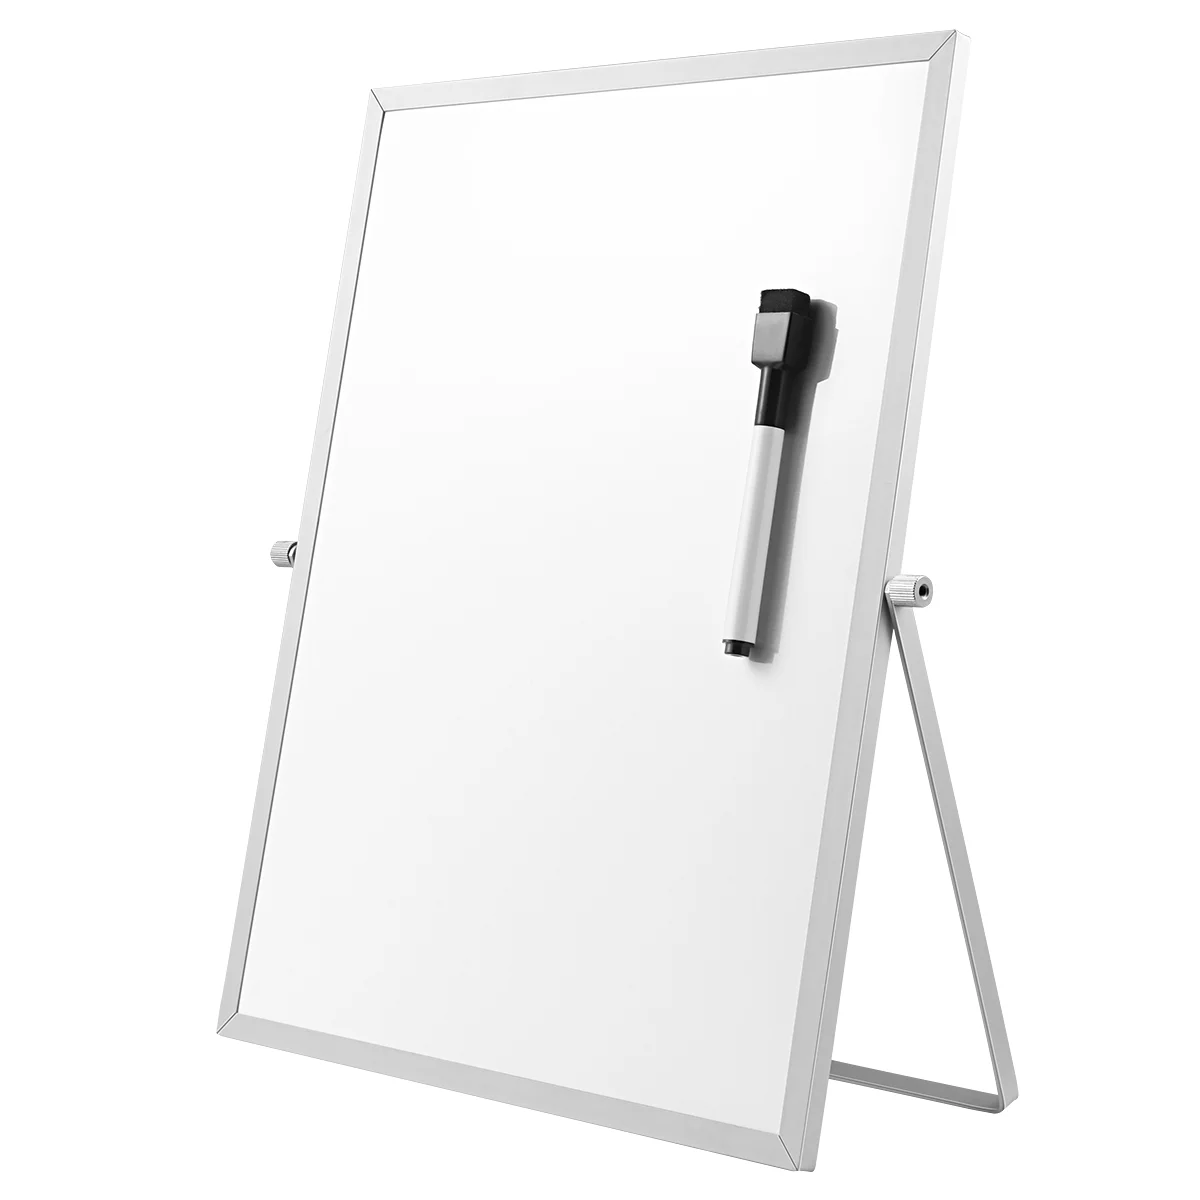 2pcs magnetic whiteboard dry erase white board flexible pad magnet fridge for home office kitchen school message board Magnetic White Board Dry Erase Board Double Sided Practical with Stand White Board for Office School Home Whiteboard Erasable